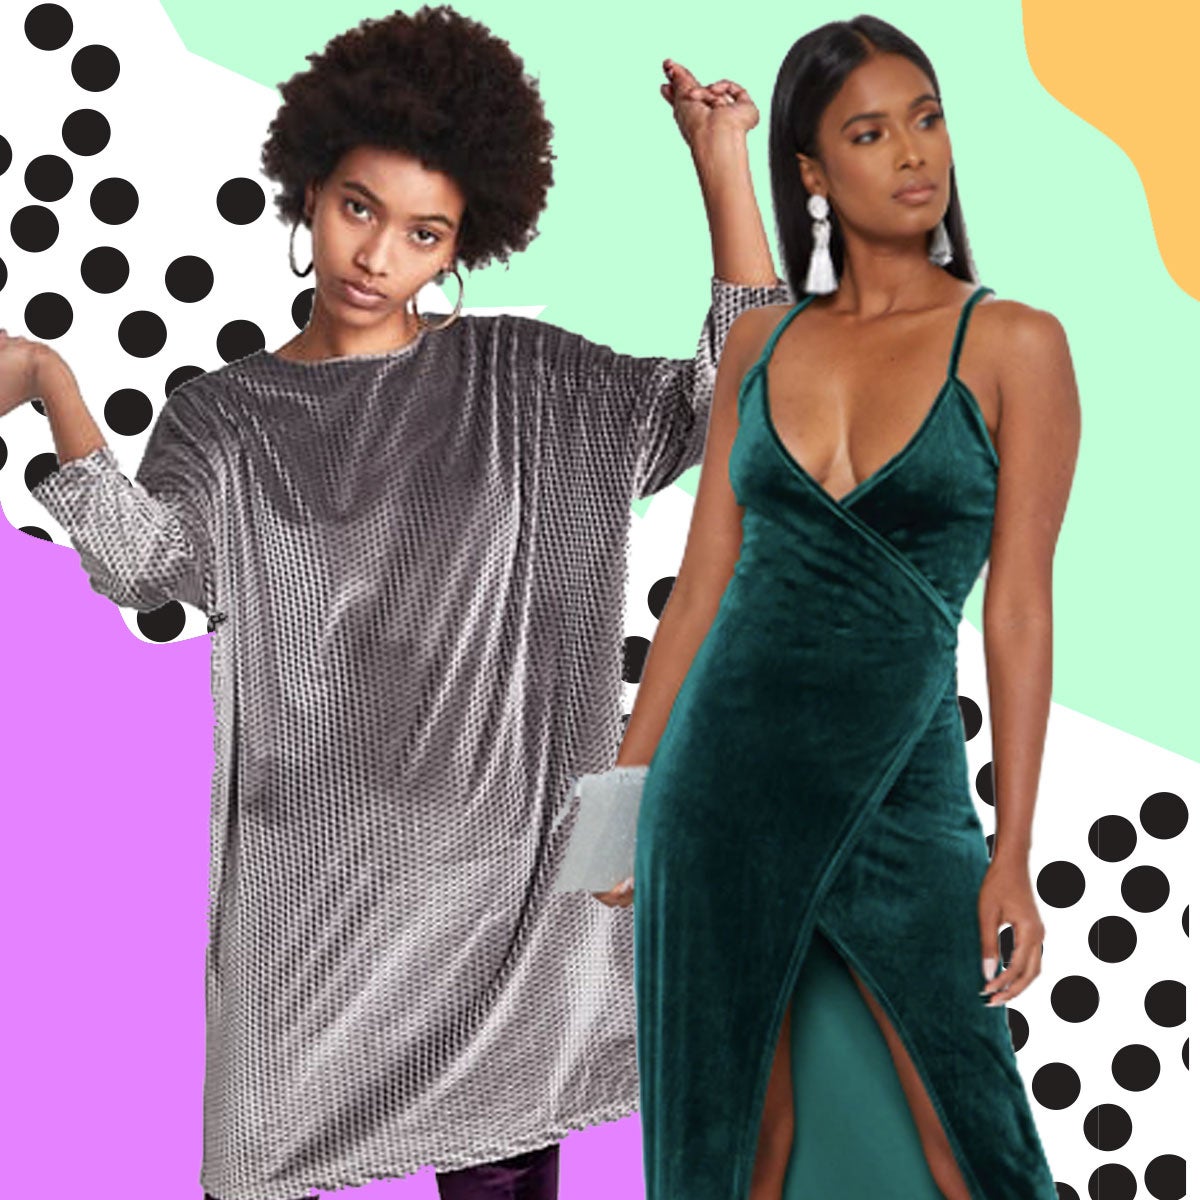 10 Dresses To Slay In This Holiday Season
